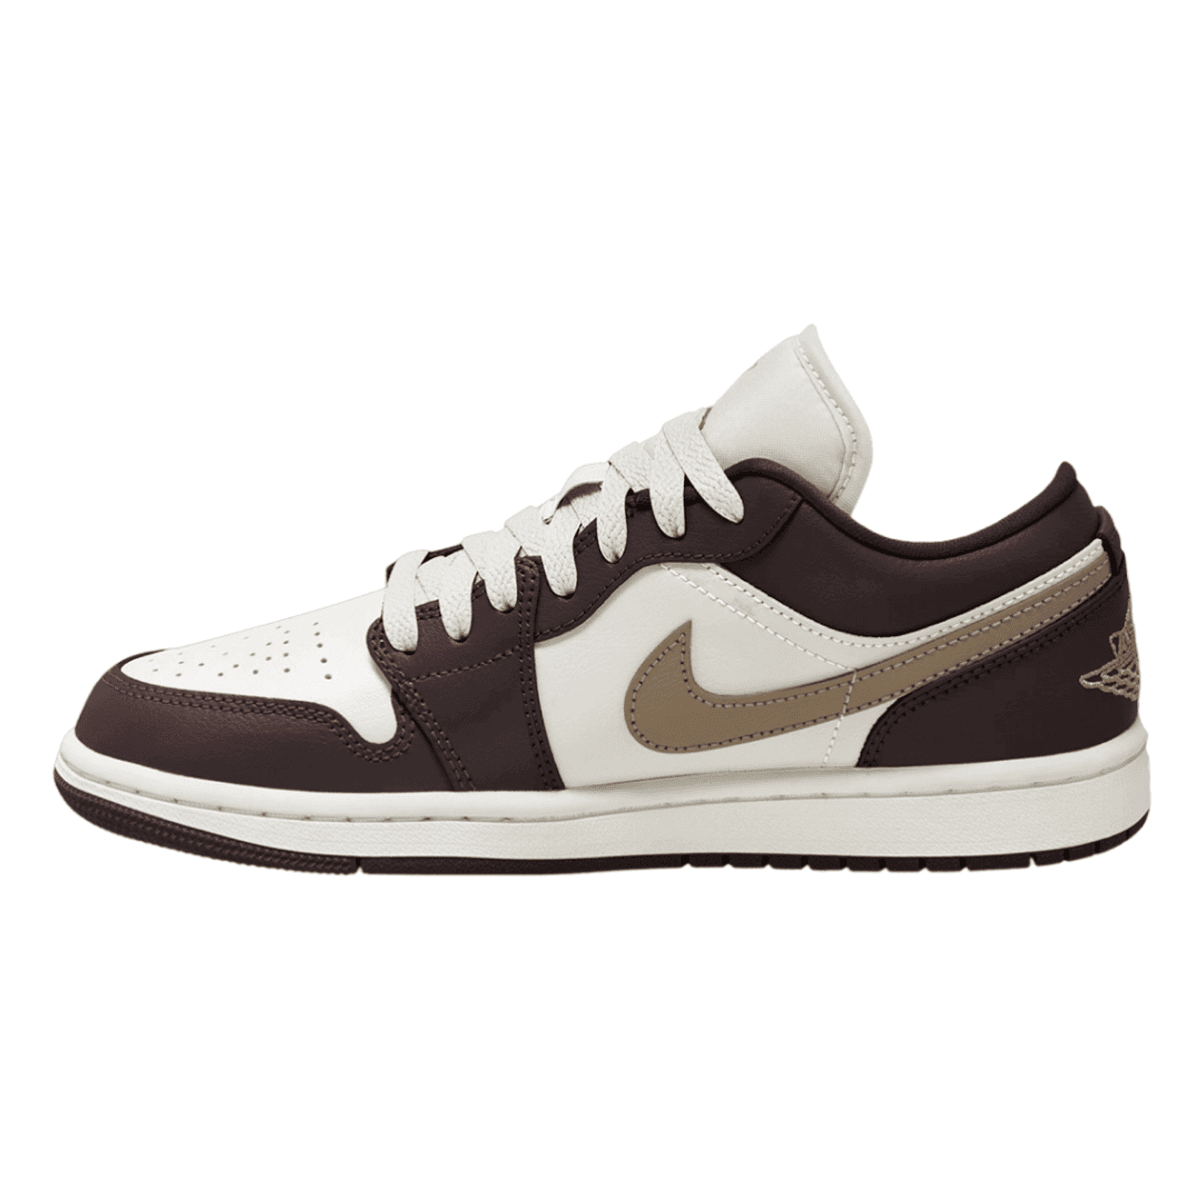 The Air Jordan 1 Low Gets Hit With A WMNS Exclusive Mocha Colorway